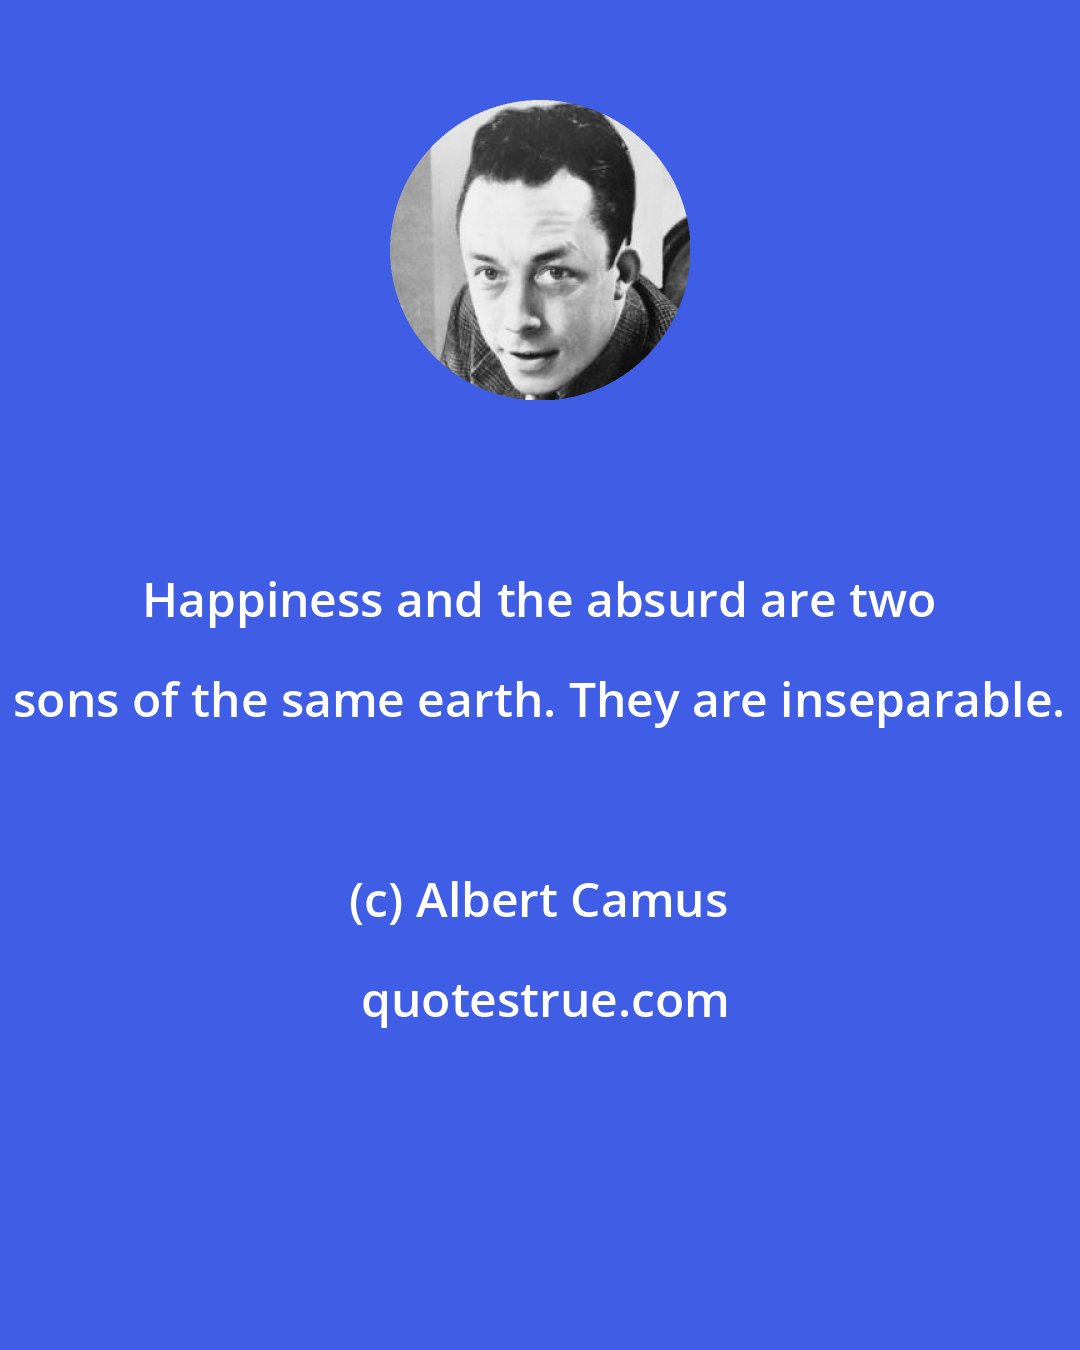 Albert Camus: Happiness and the absurd are two sons of the same earth. They are inseparable.